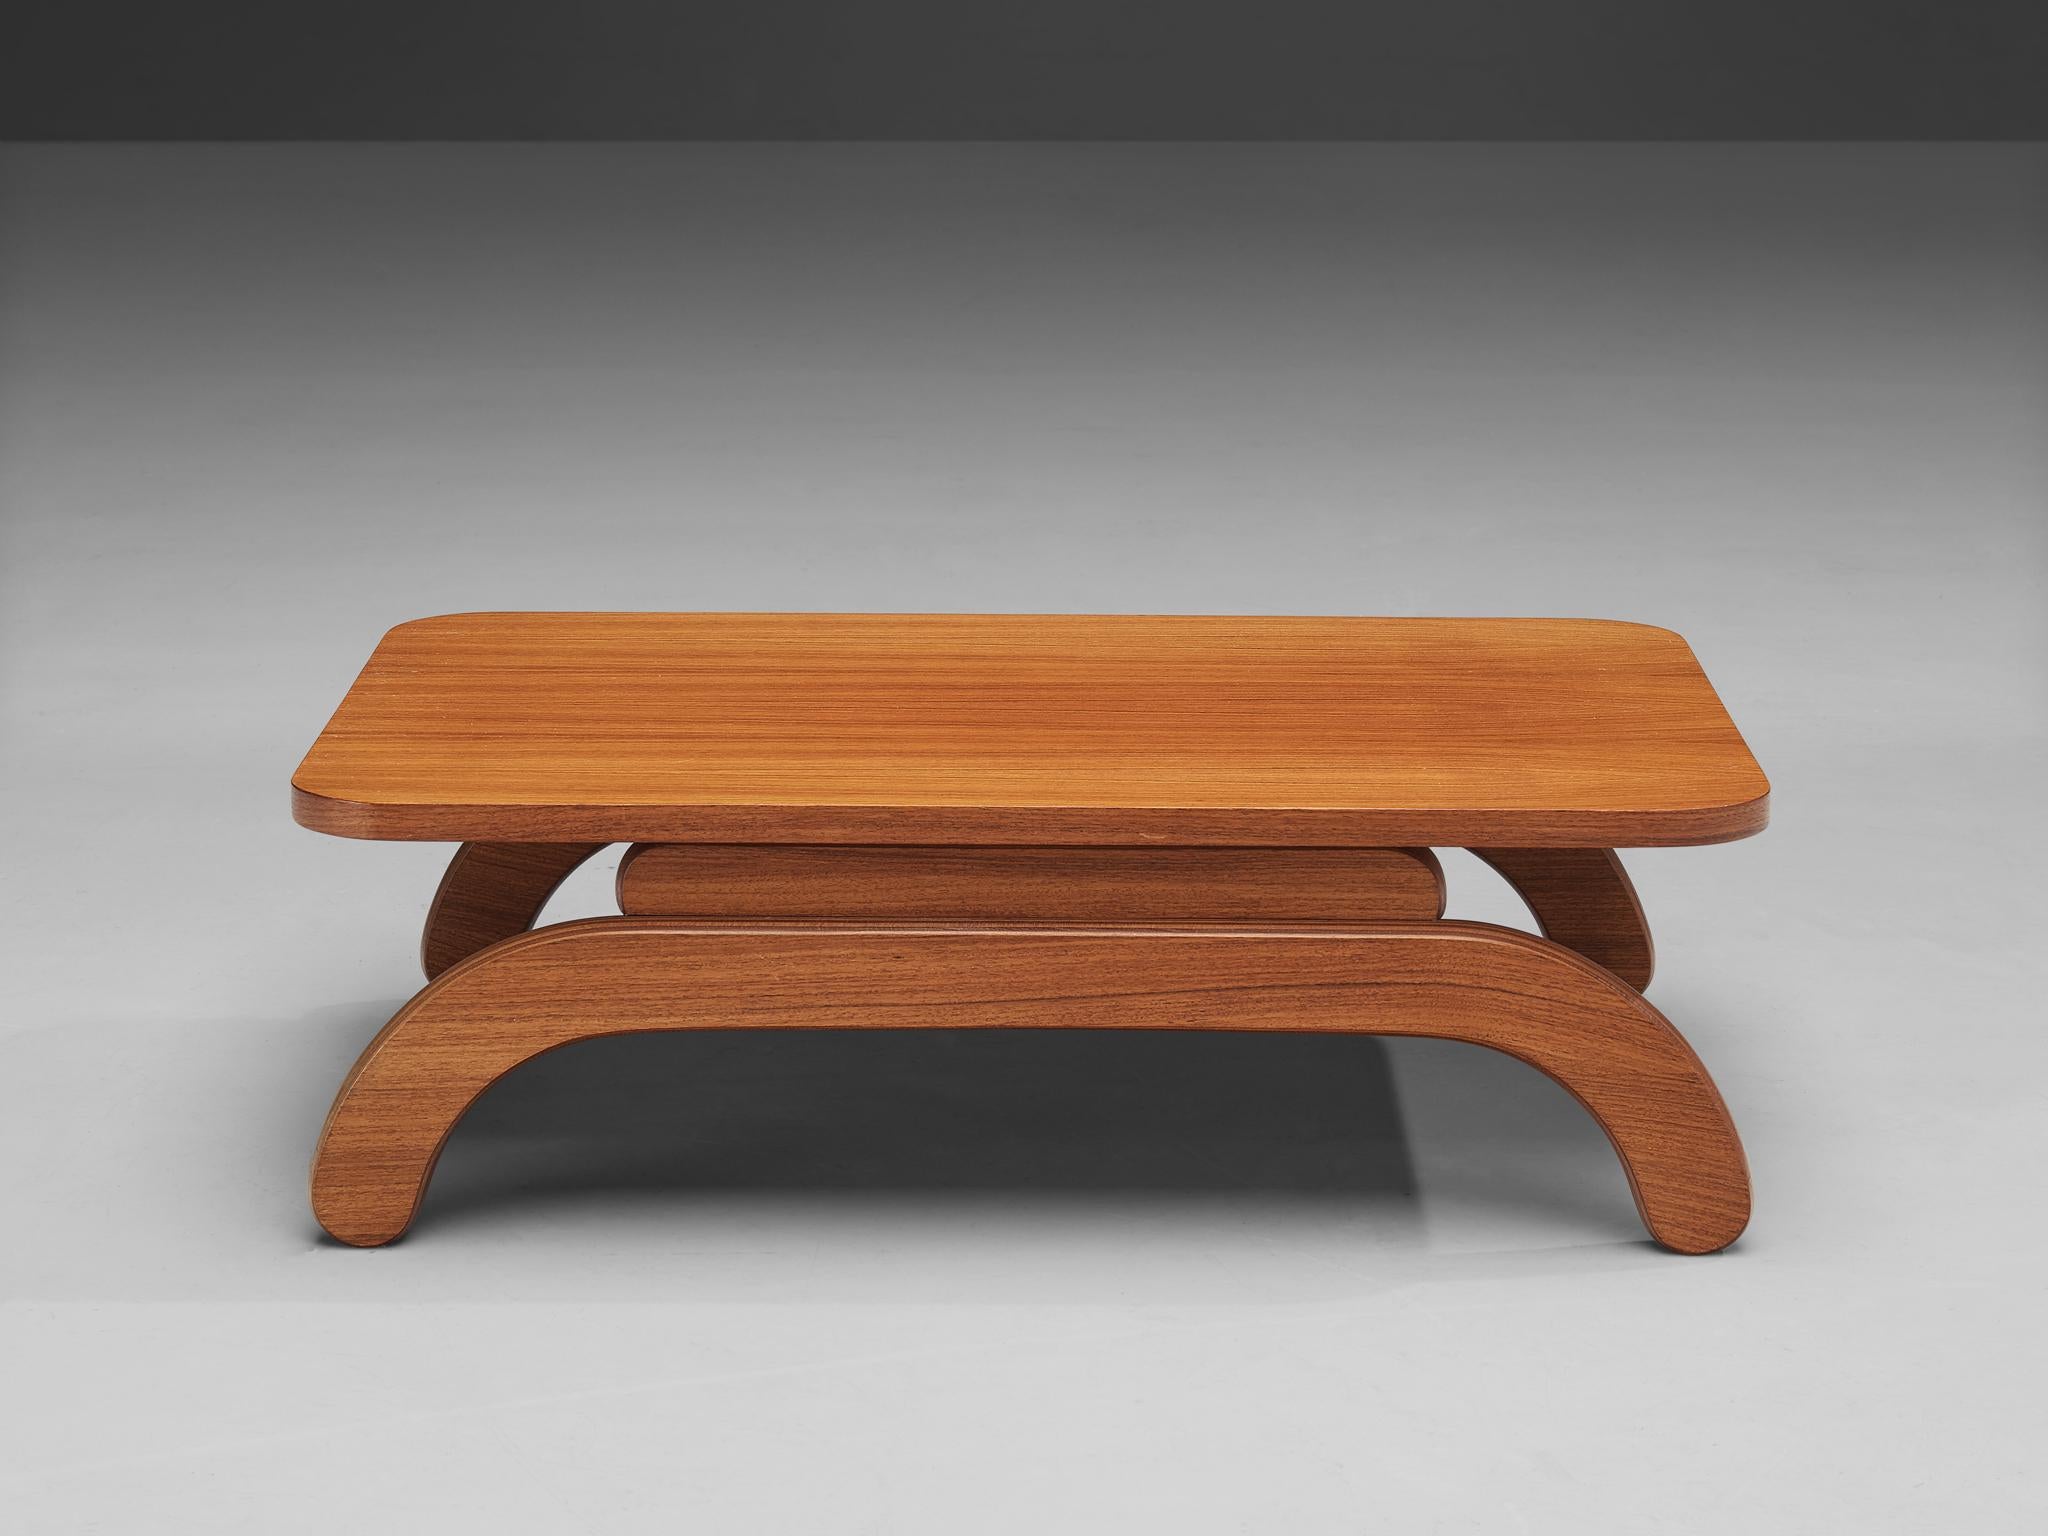 Karl Wittman for Wittmann Möbelwerkstätten, coffee table, model 'Independence', teak, Austria, 1968 

This utterly well-balanced coffee table is executed in teak. The whole construction is unified and understated, where clean, curved lines are